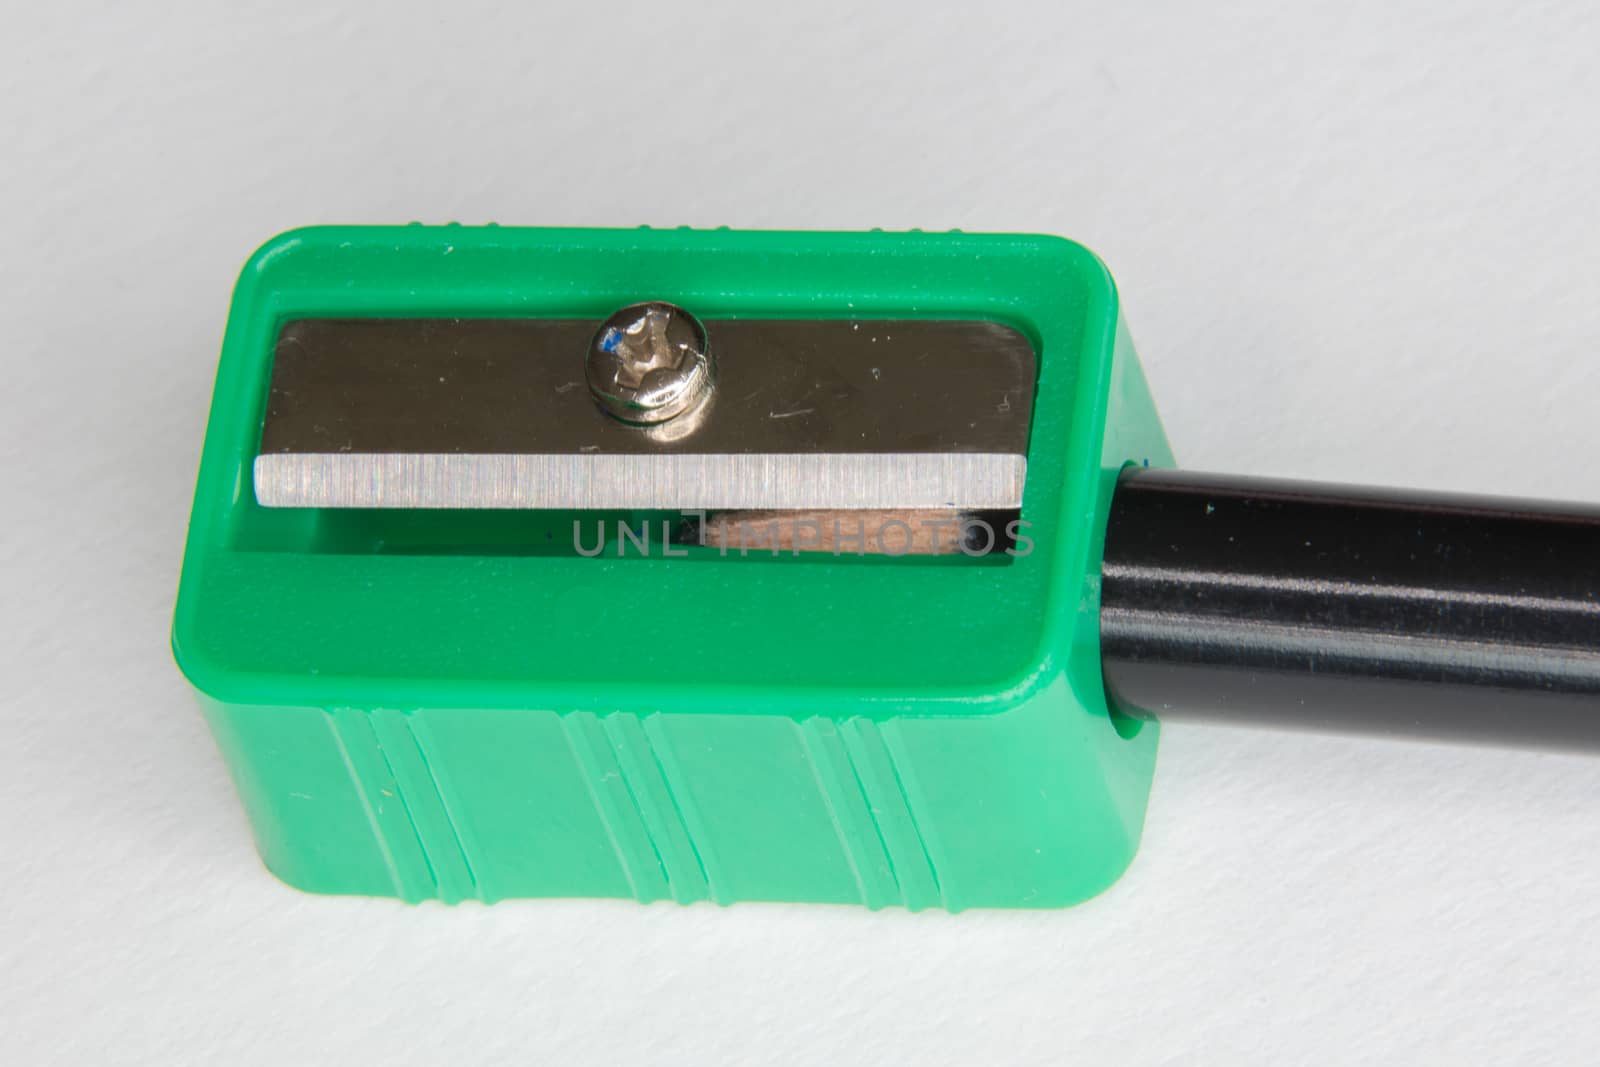 Green pencil sharpener with a black pencil on a white background